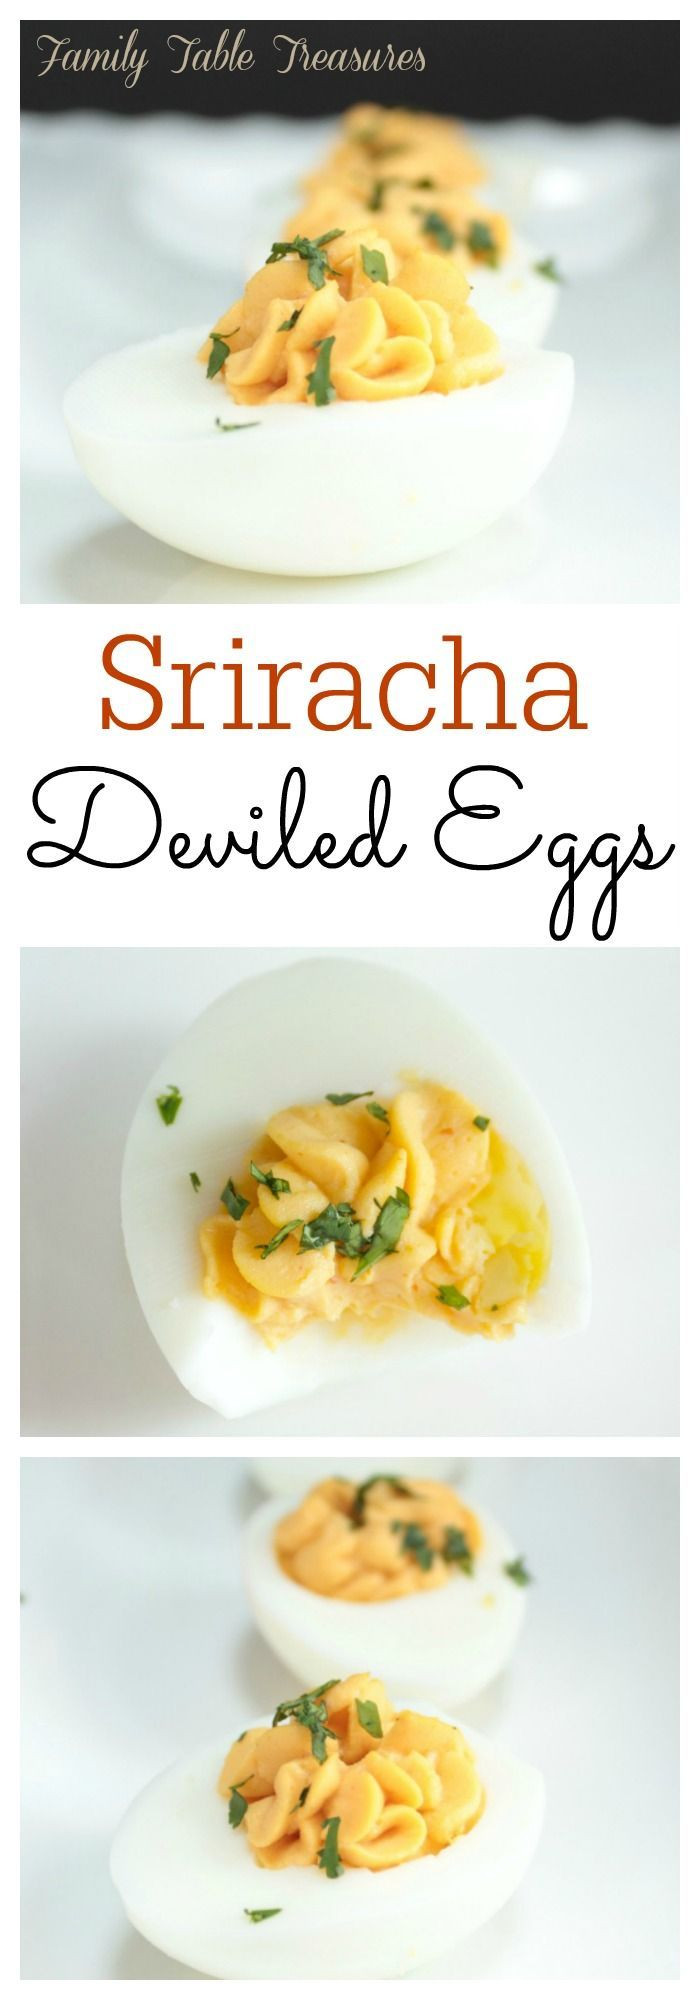 How Did Deviled Eggs Get Their Name
 Sriracha Deviled Eggs Recipe With images